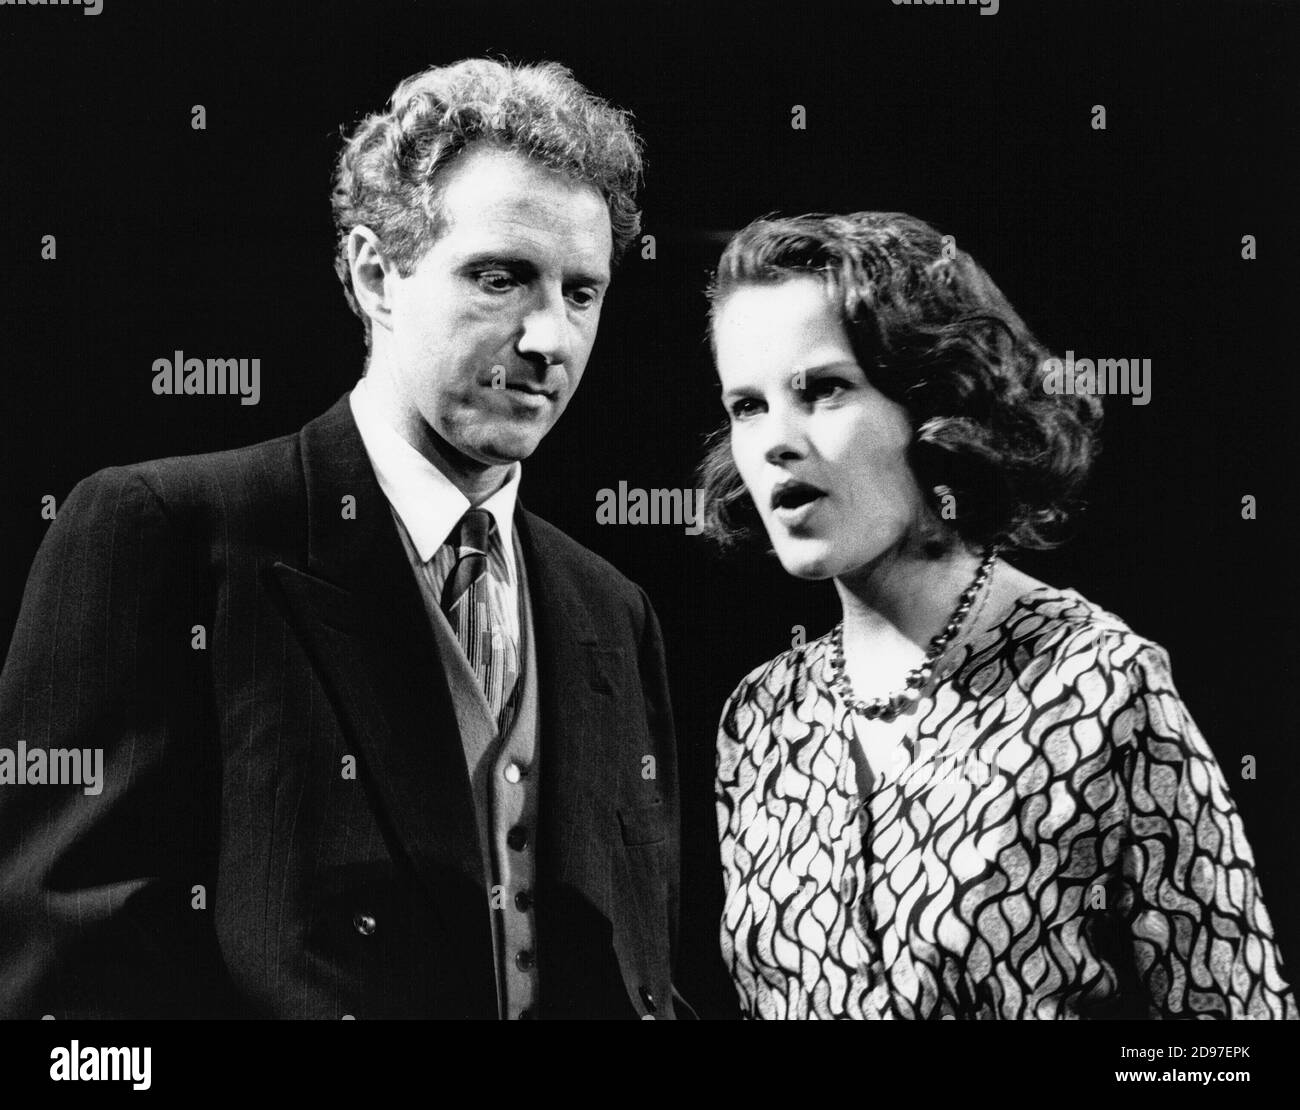 AWAKE AND SING!  by Clifford Odets  design: Martin Johns  lighting: Leonard Tucker  director: Lou Stein  Michael J. Jackson (Moe Axelrod), Elaine R. Smith (Hennie Berger)  Palace Theatre, Watford, England  04/04/1989                 (c) Donald Cooper/Photostage   photos@photostage.co.uk   ref/BW-P-153-11 Stock Photo